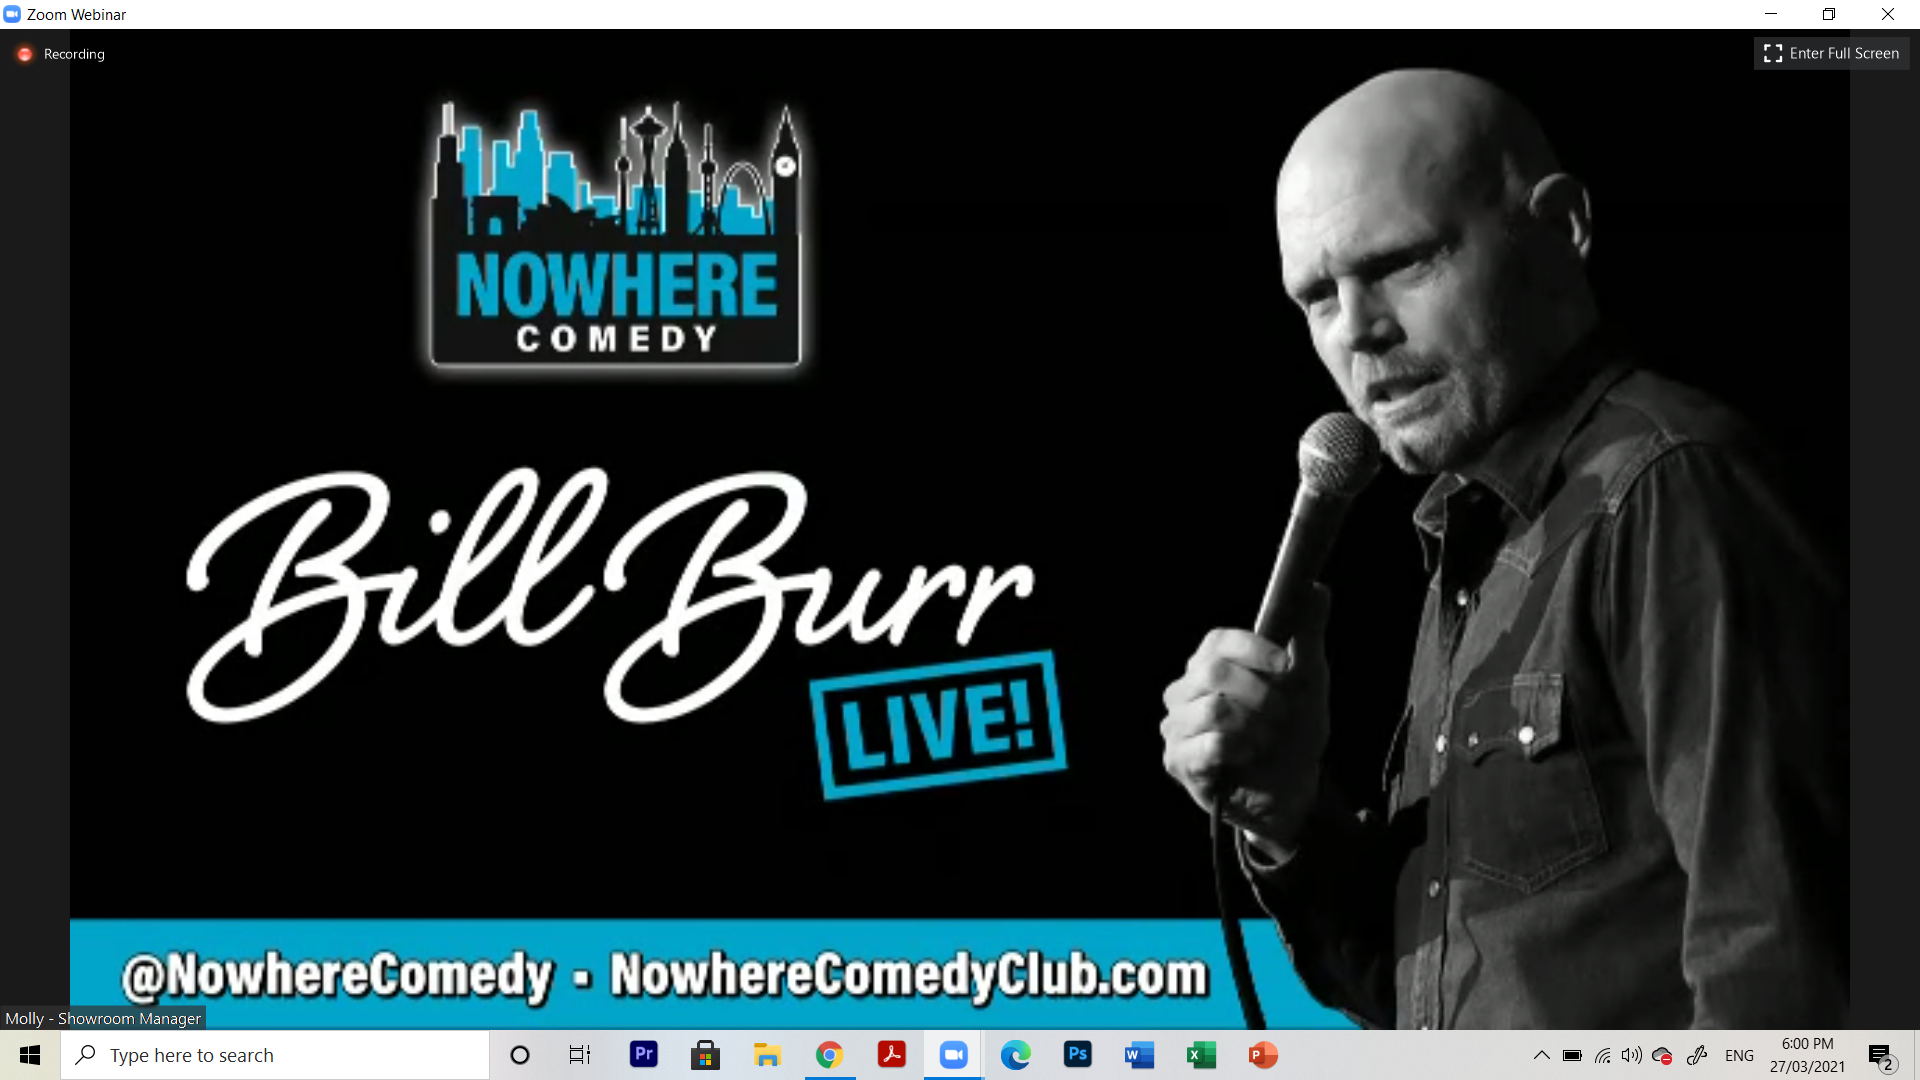 Bill Burr & Co Live! on Zoom: “I’m just an angry man in a garage” thumbnail